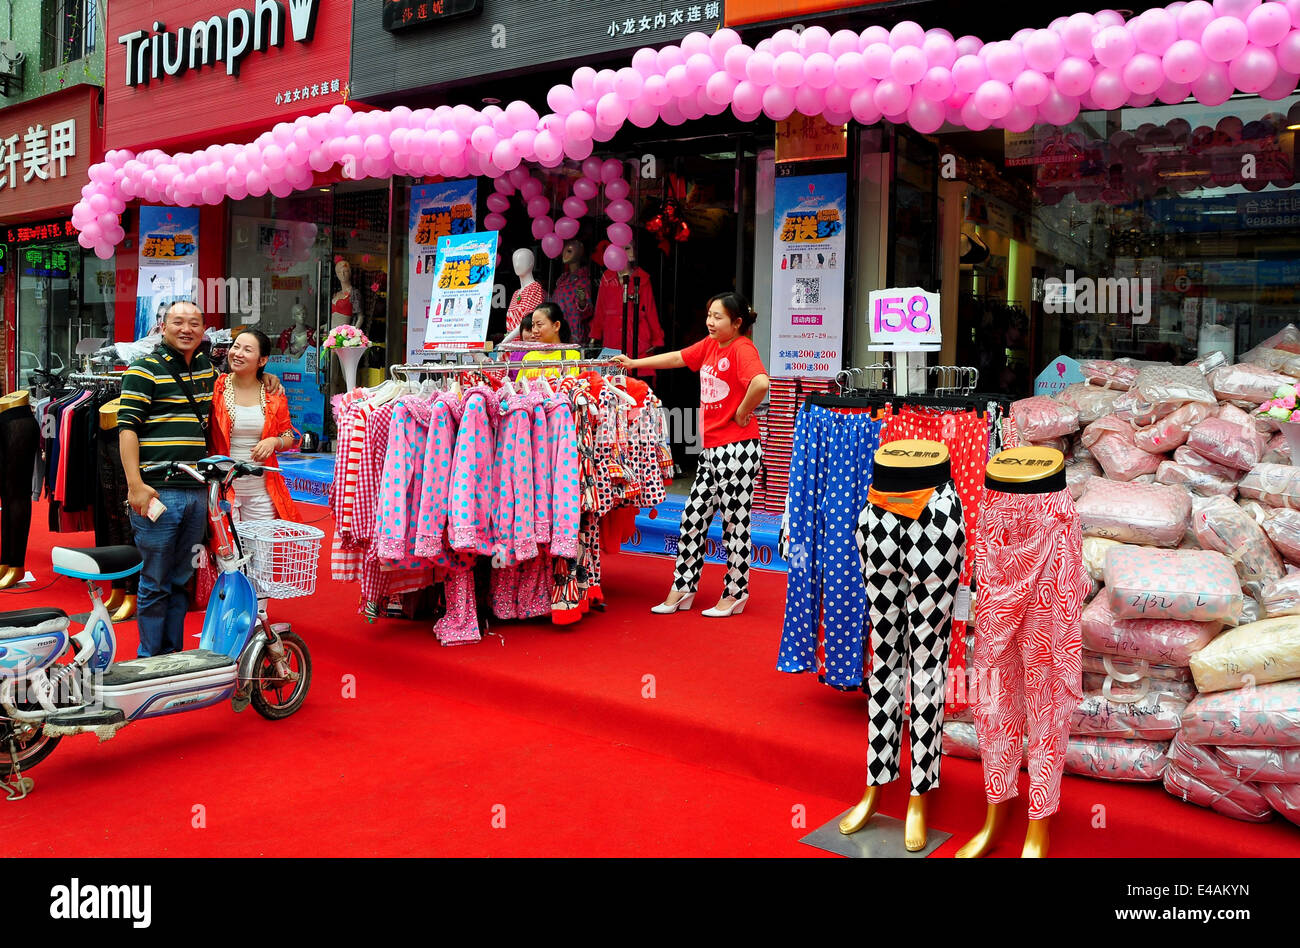 PENGZHOU, CHINA: Garlands of pink balloons decorate a newly opened clothing shop Stock Photo